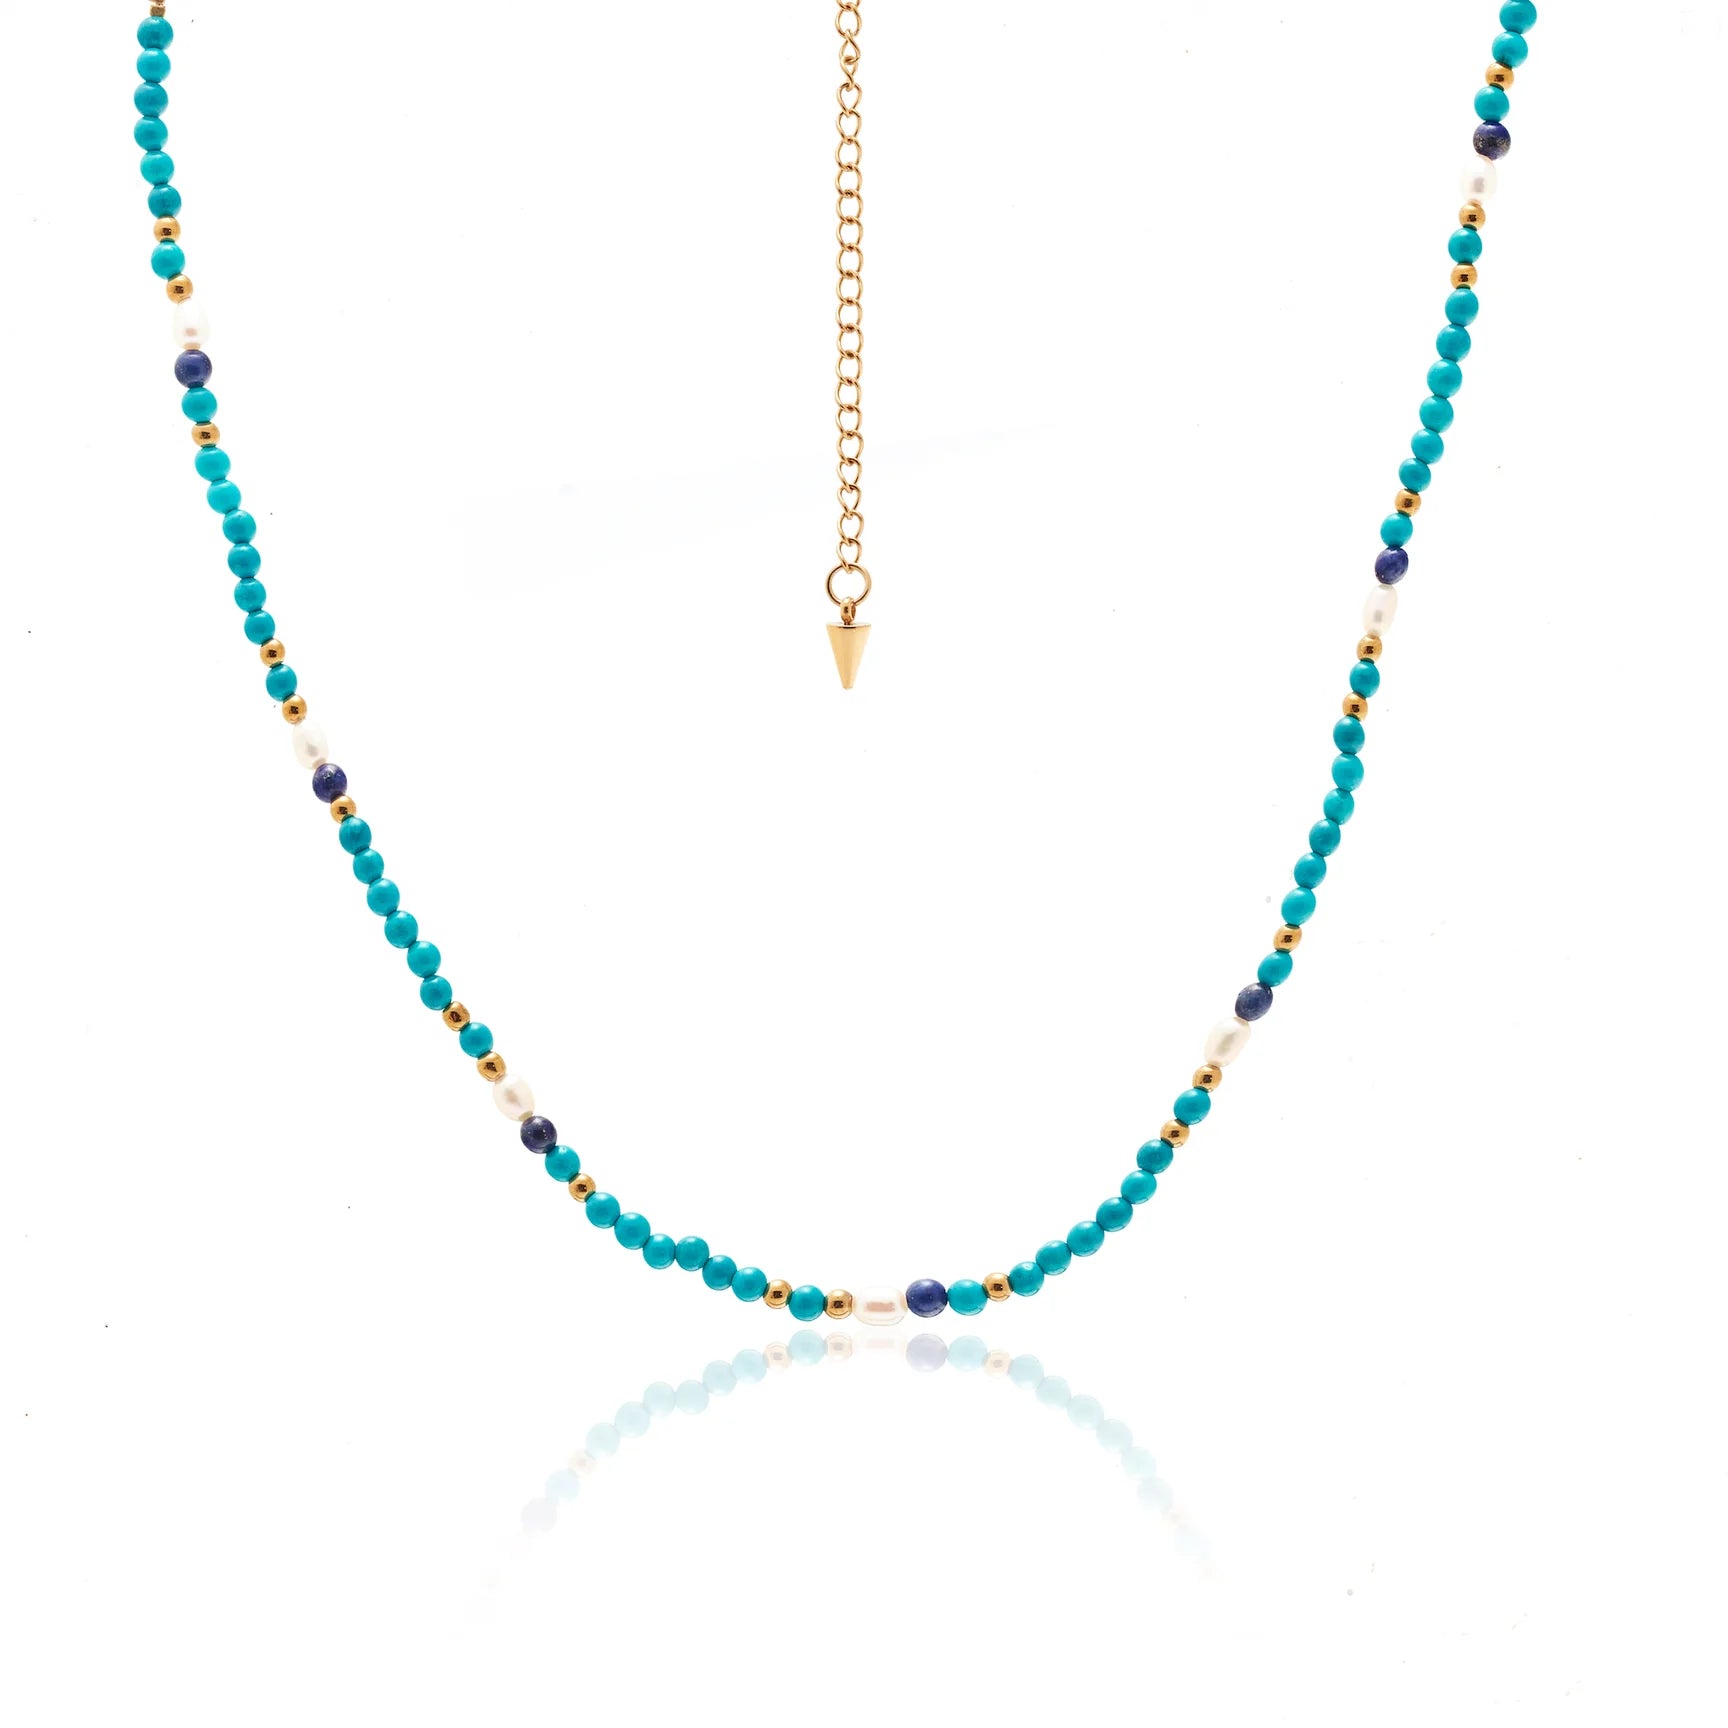 SILK & STEEL - SORRENTO NECKLACE TURQUOISE GOLD NECKLACE